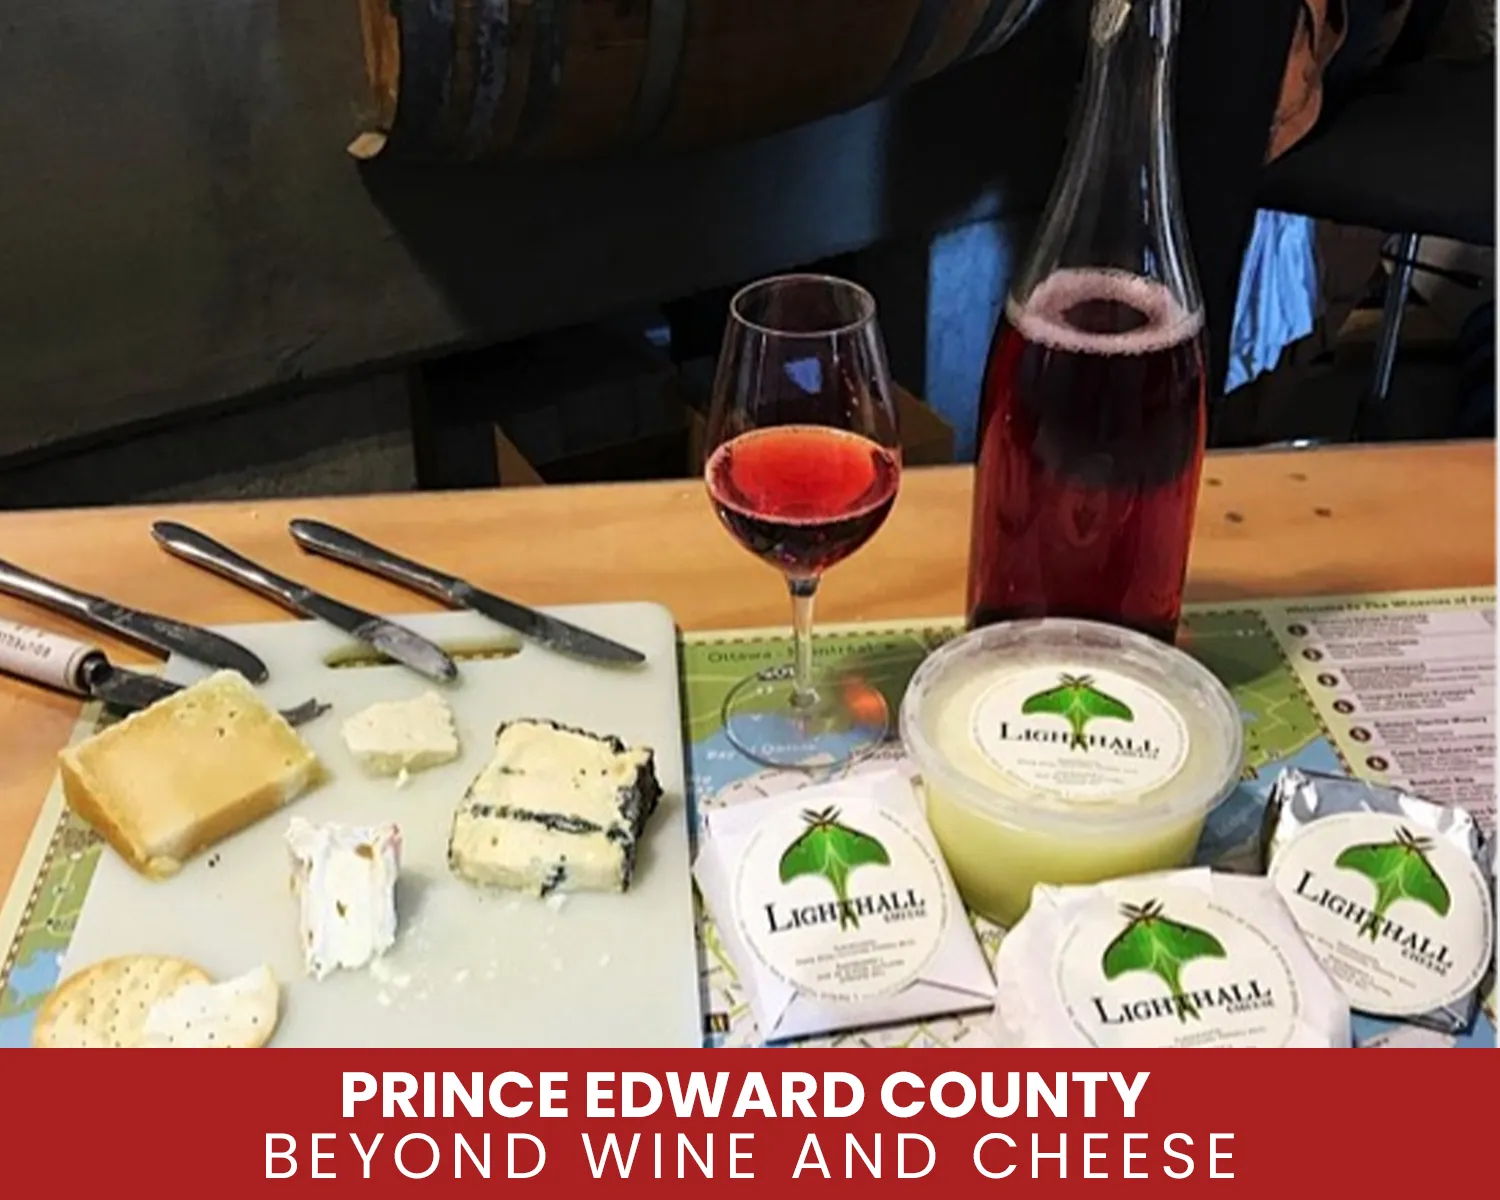 Prince Edward County: Beyond Wine and Cheese